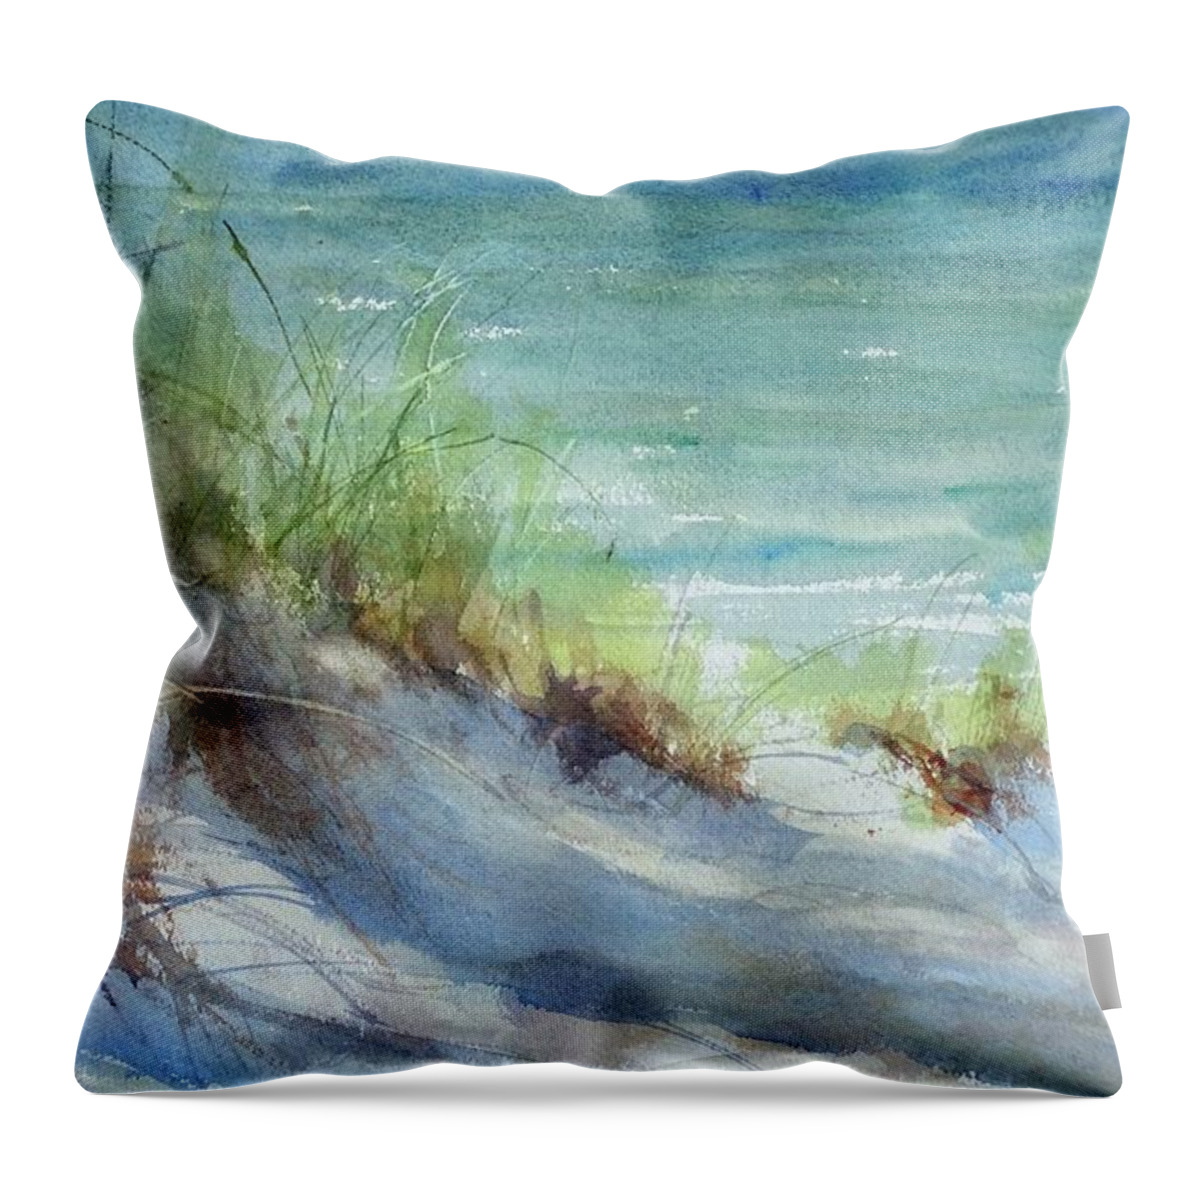 Lake Michigan Throw Pillow featuring the painting Kirk County Morning by Sandra Strohschein